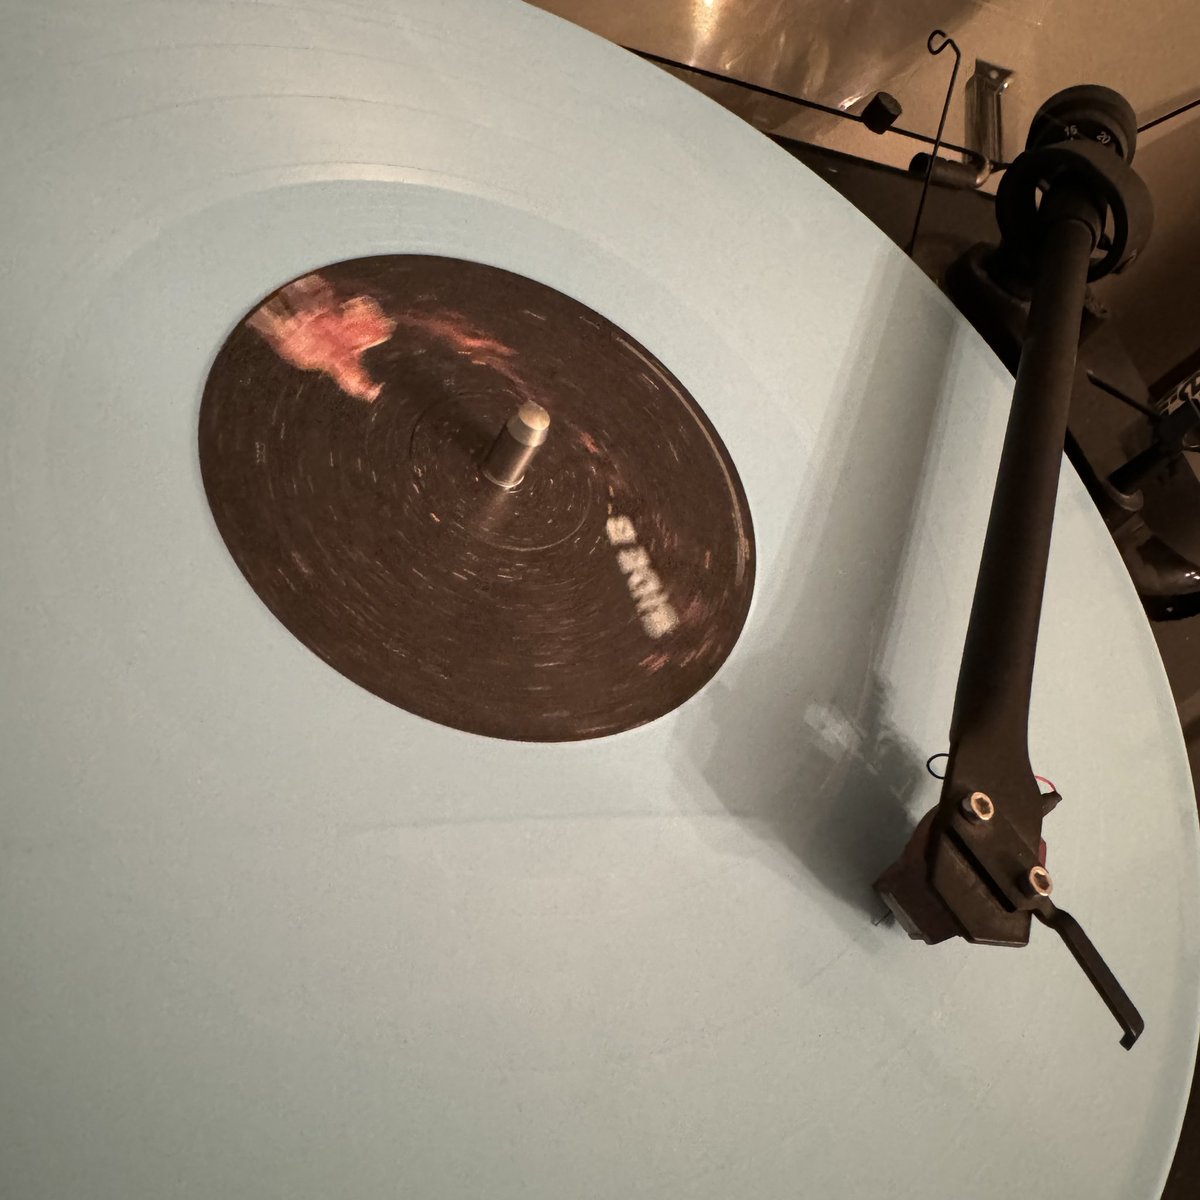 Well, this is rather lovely… @Grandaddy @jasonlytle #newmusic #colouredvinyl #nowspinning